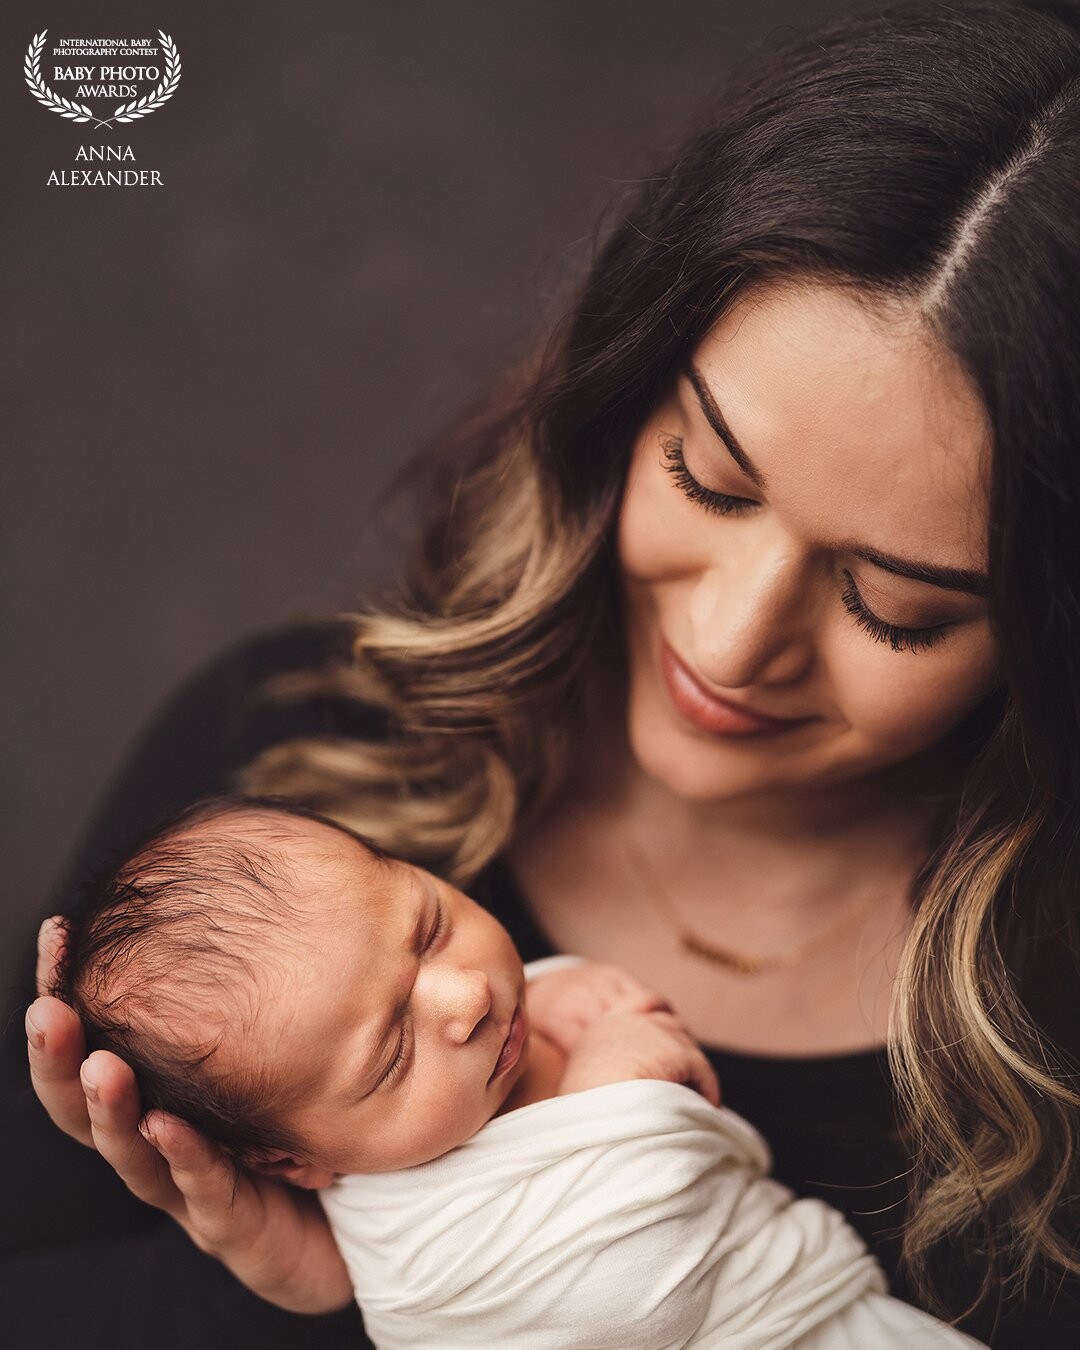 The connection between a mother and a child is unique, beautiful and one of a kind. These are my favorite images to capture! So much love, gentleness, and wisdom in it.